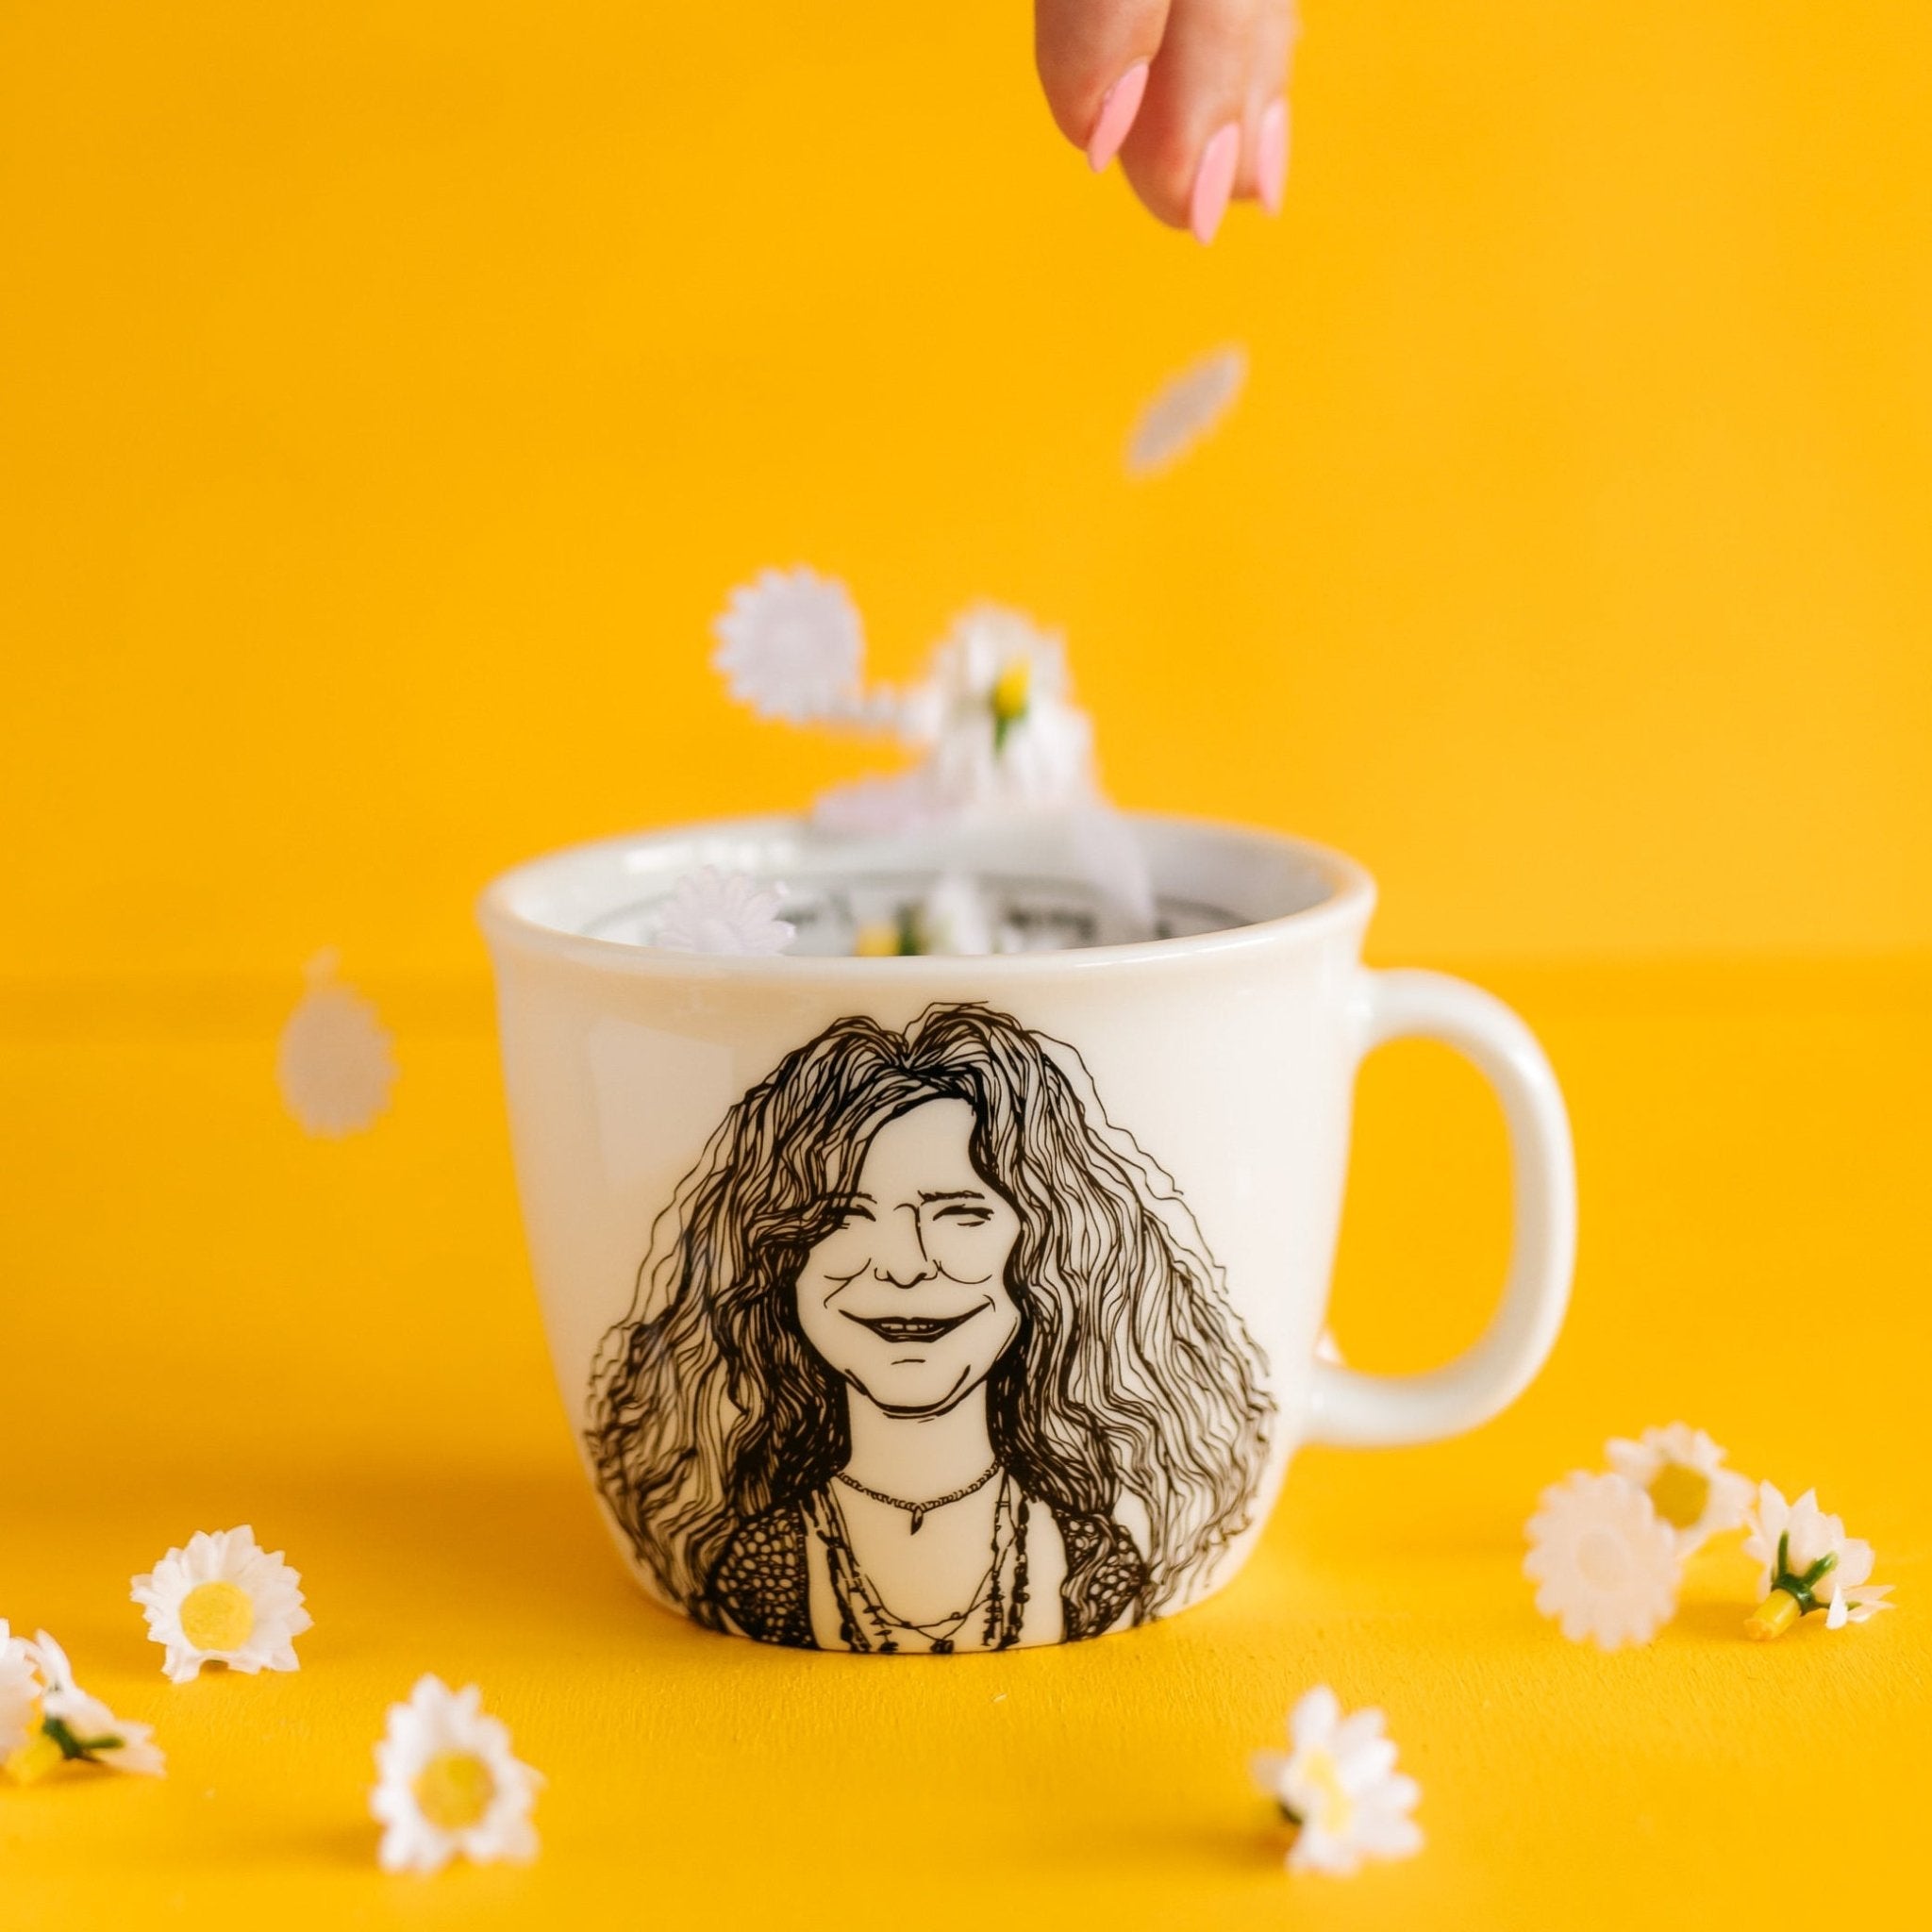 Porcelain cup inspired by Janis Joplin with daisies